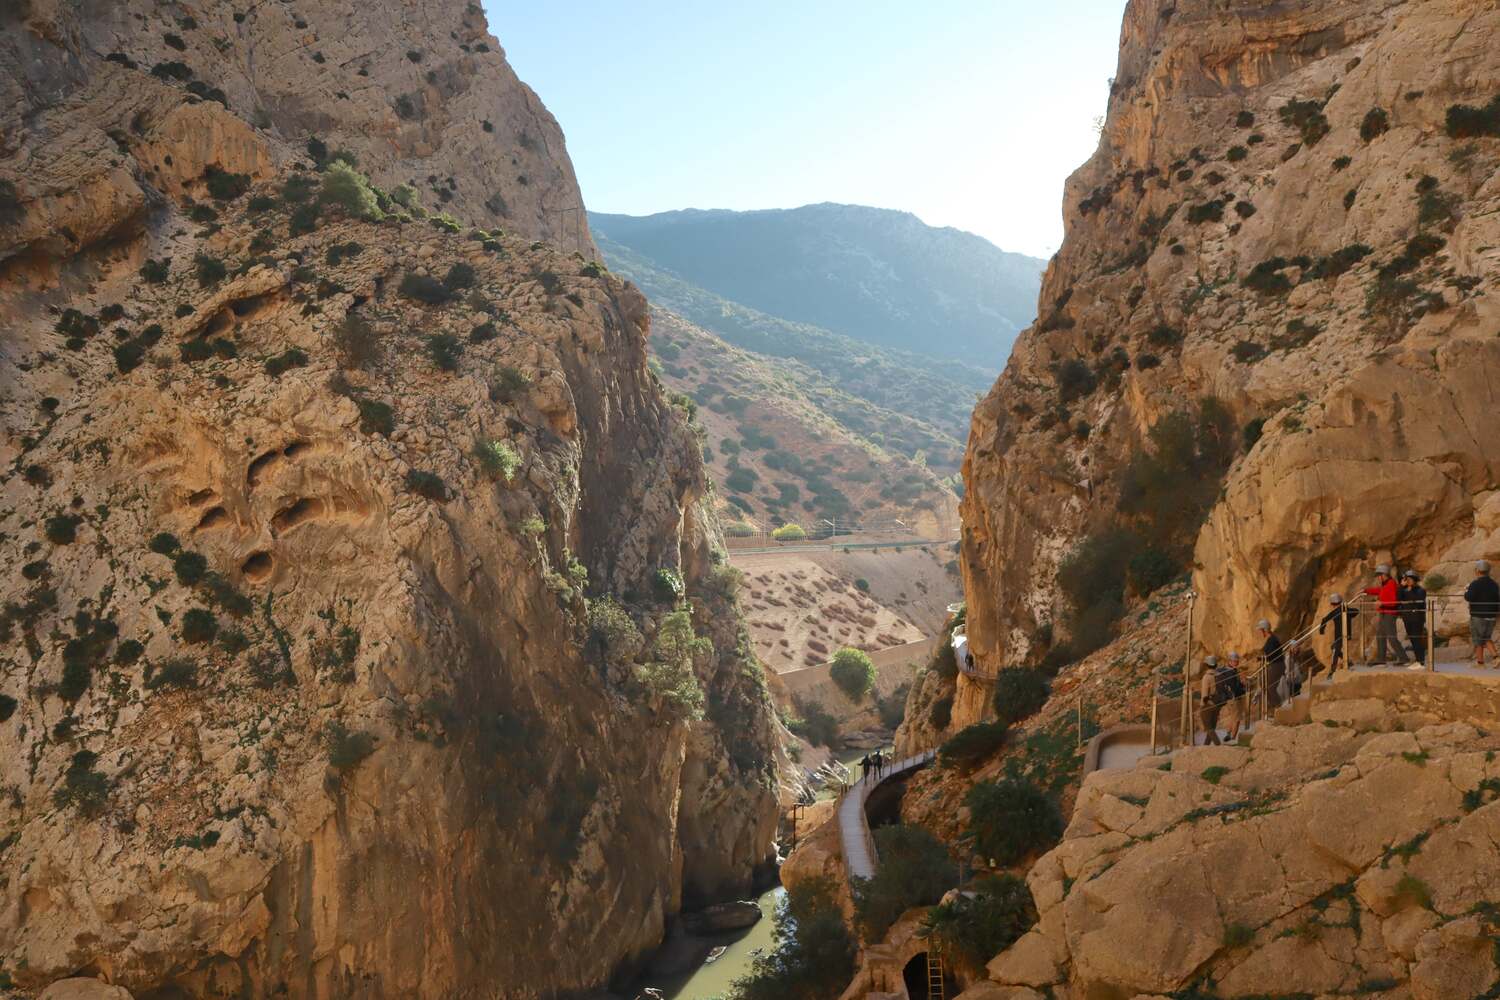 Caminito-Del-Rey-parking, Narrow trail through the rocky gorge of El Caminito del Rey with hikers in the distance.